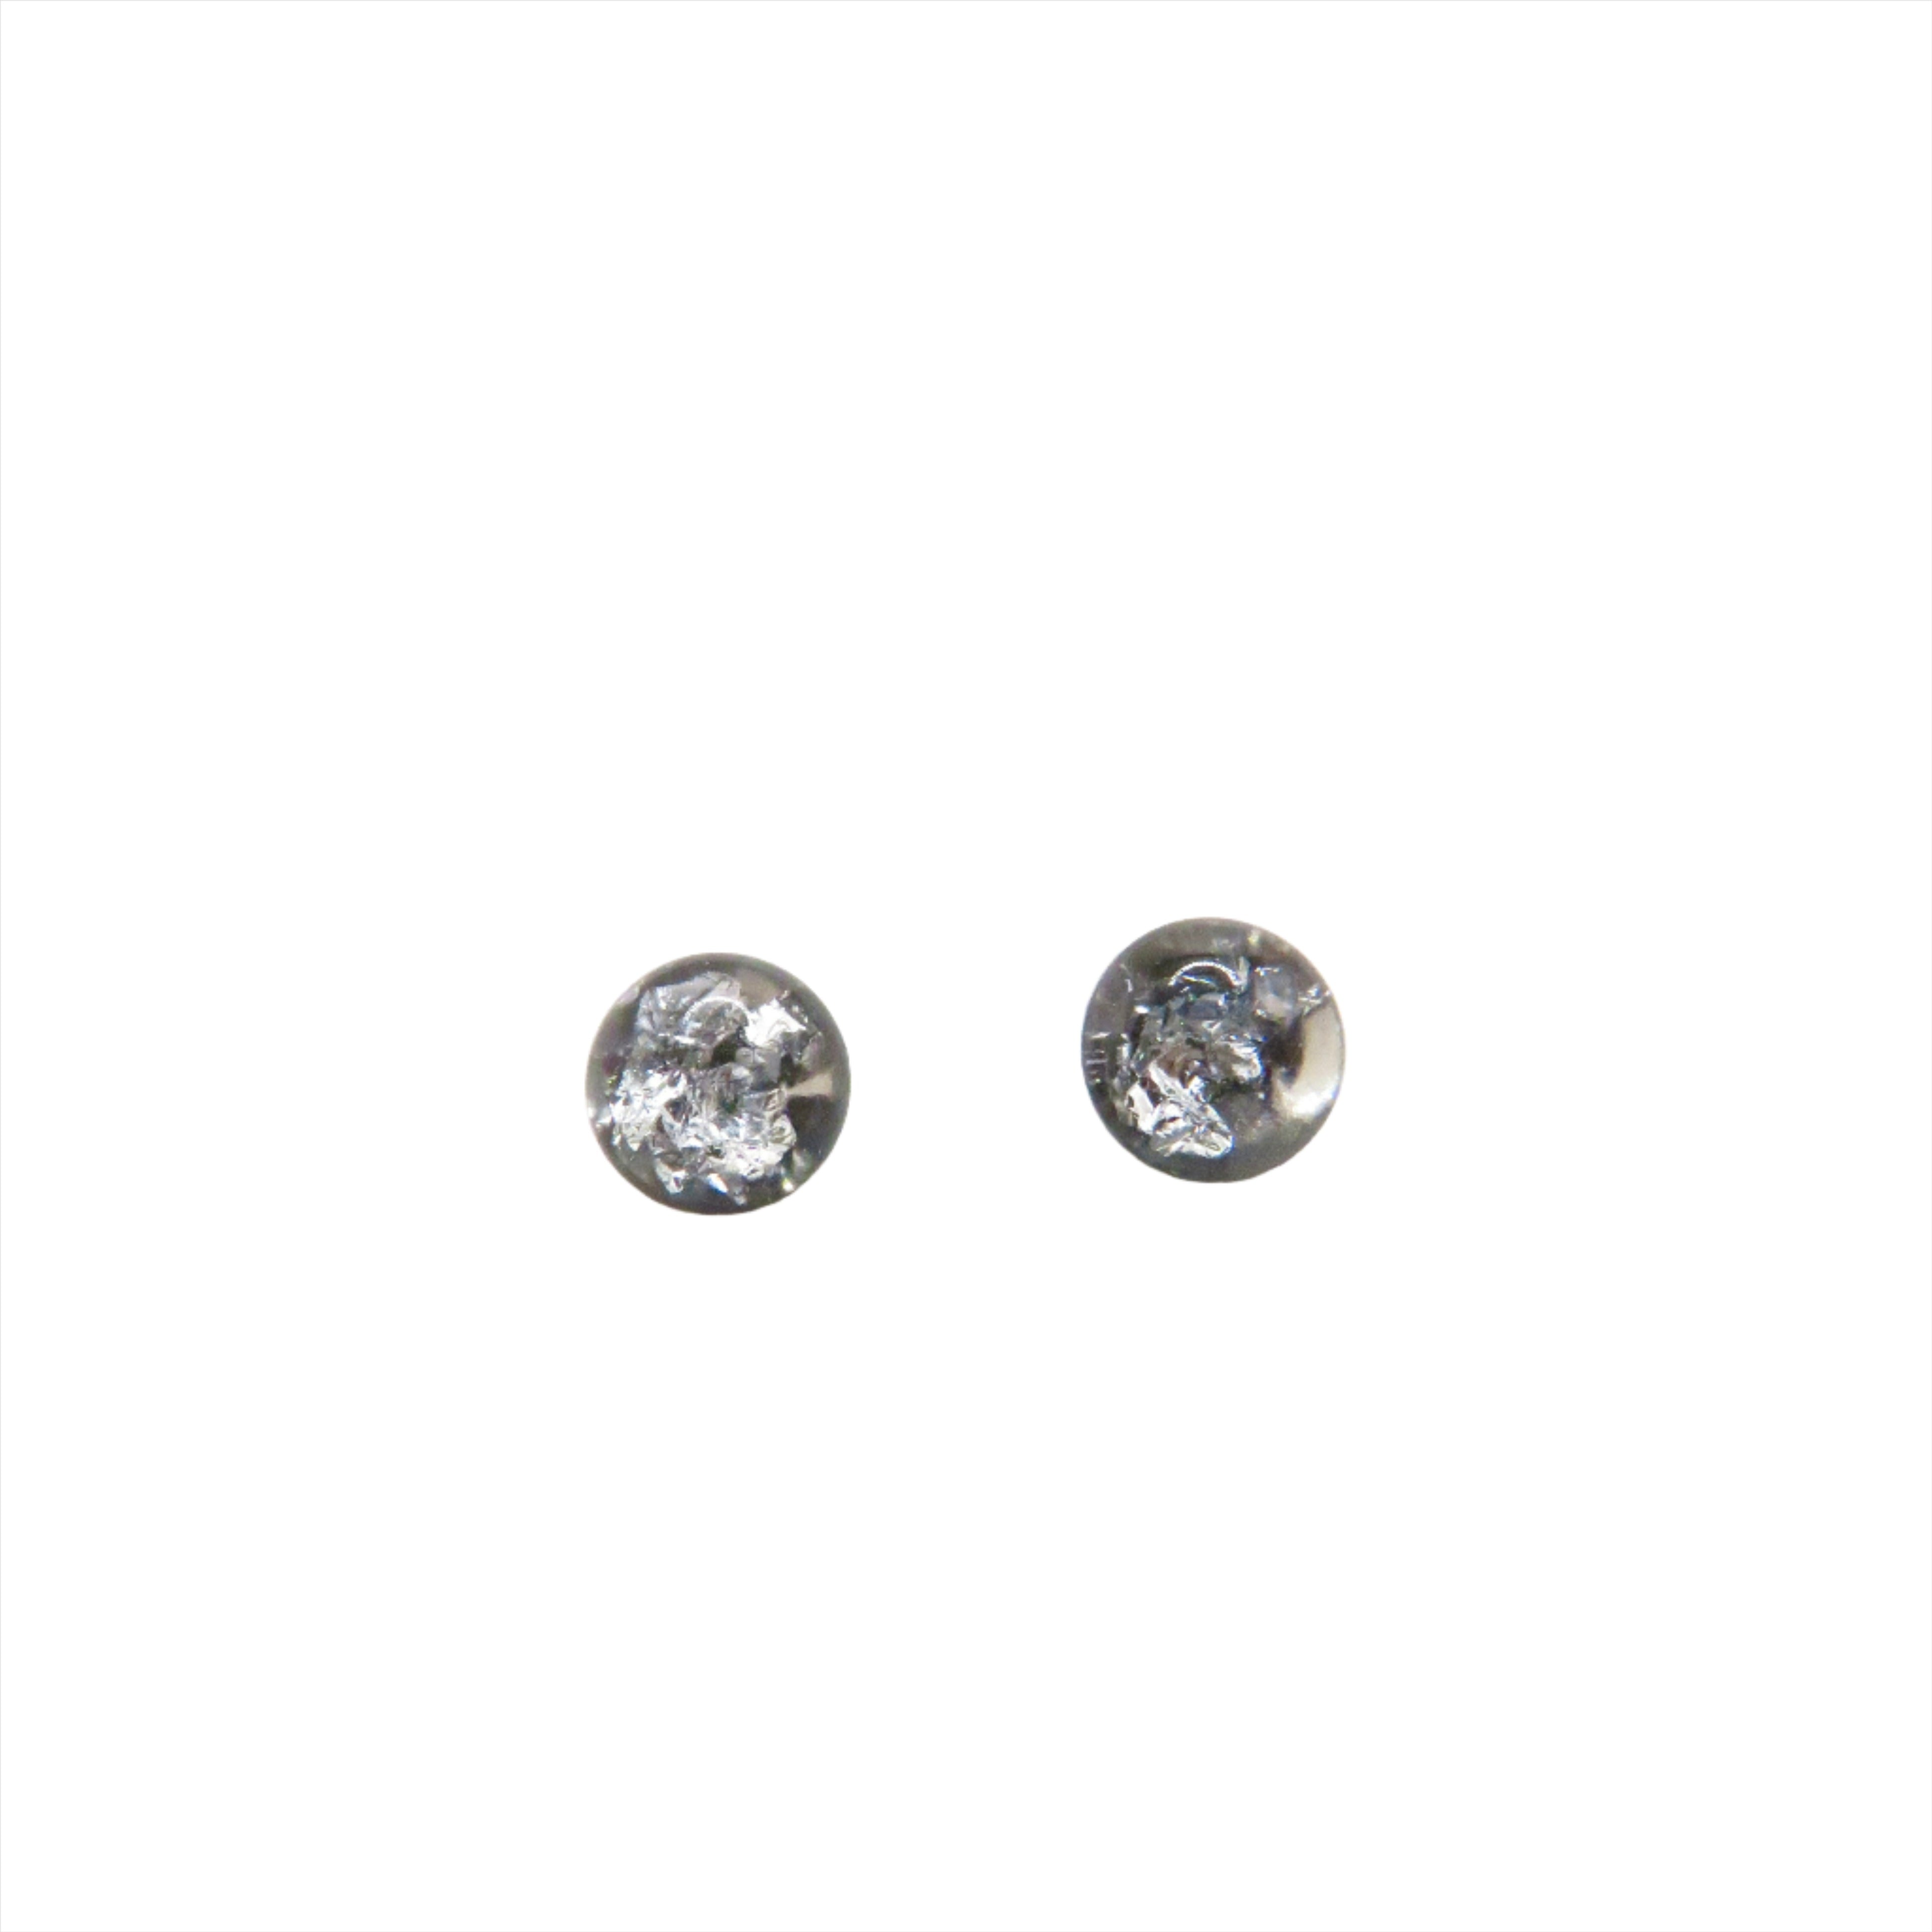 6mm Round Crushed Gemstone Stud Earrings | Assorted Stones